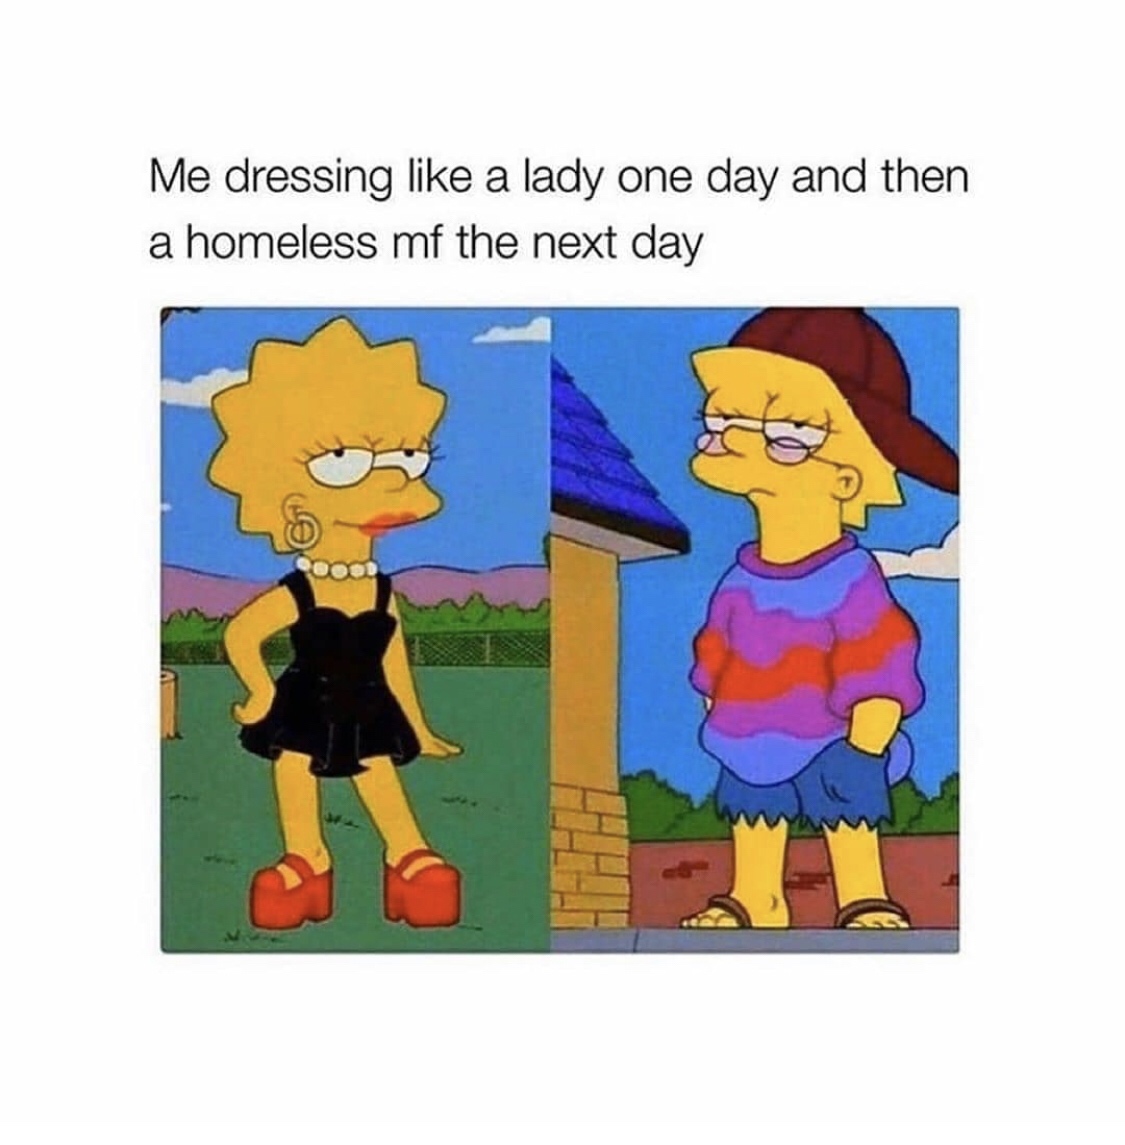 me dressing like a lady one day - Me dressing a lady one day and then a homeless mf the next day